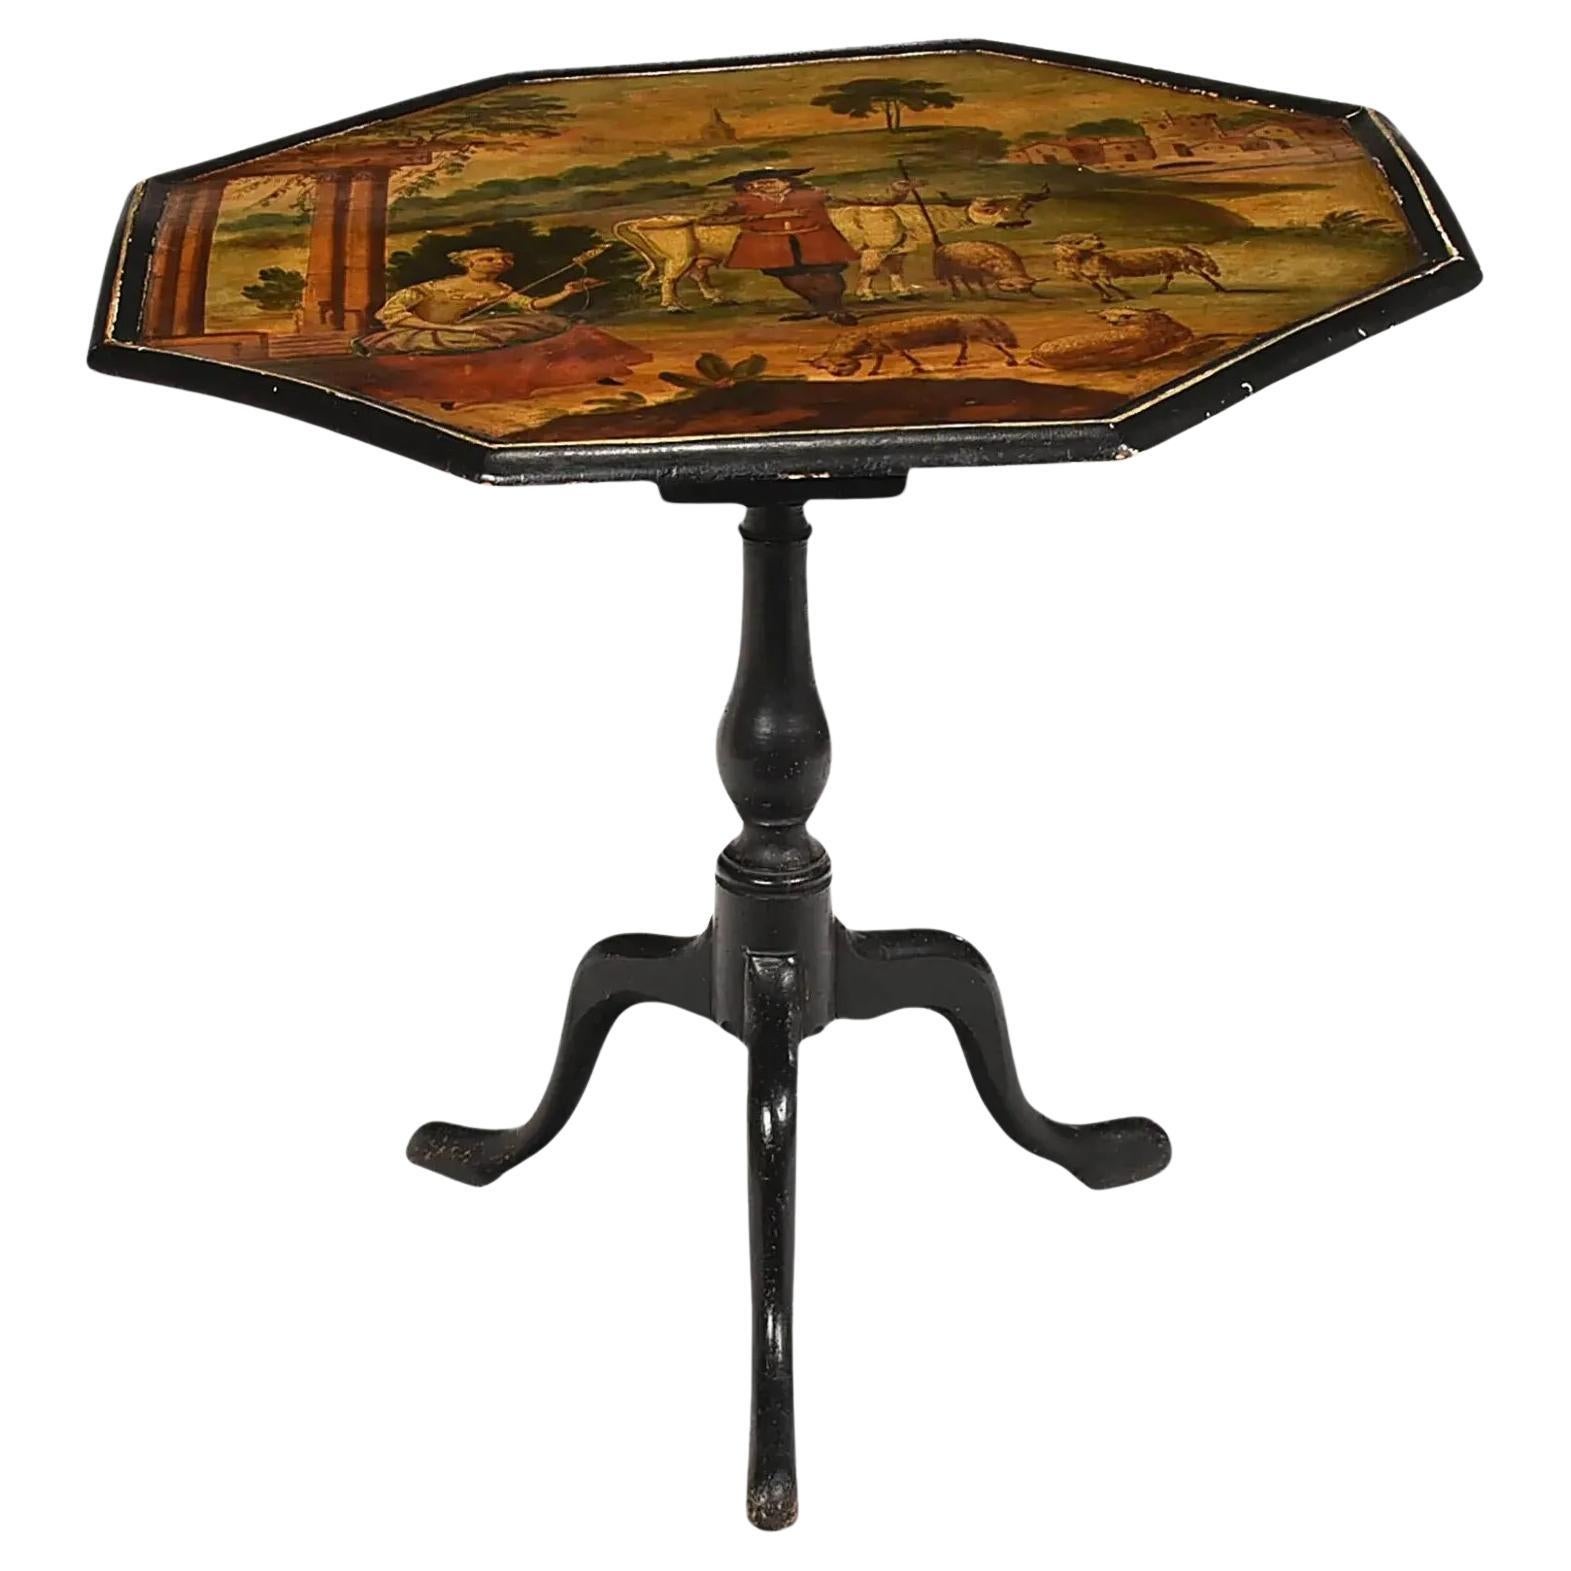 1700's Antique George III Style, Paint Decorated, OctagonalTea, Tilt Top Table!! For Sale